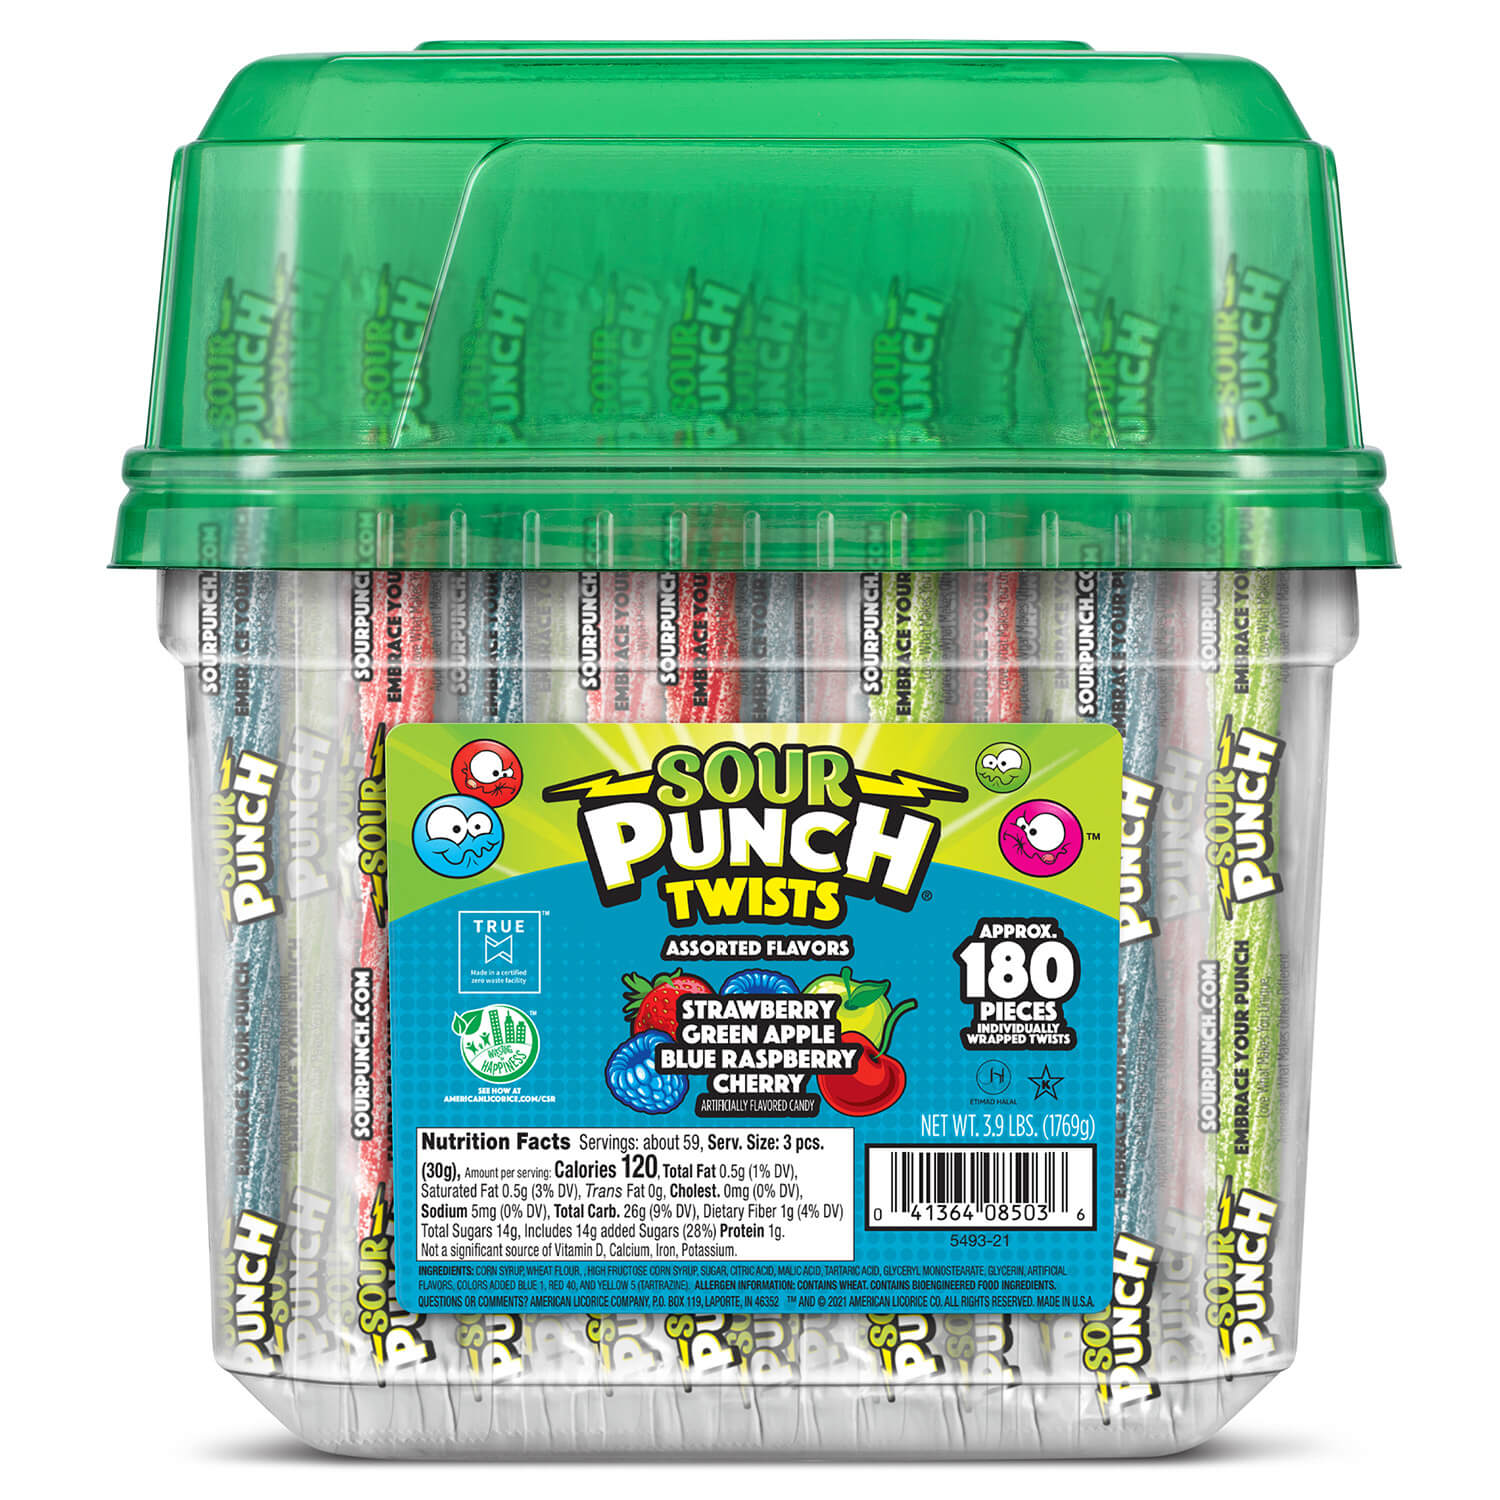 Sour Punch 6" Individually Wrapped Assorted Candy Twists 3.90 lb Jar